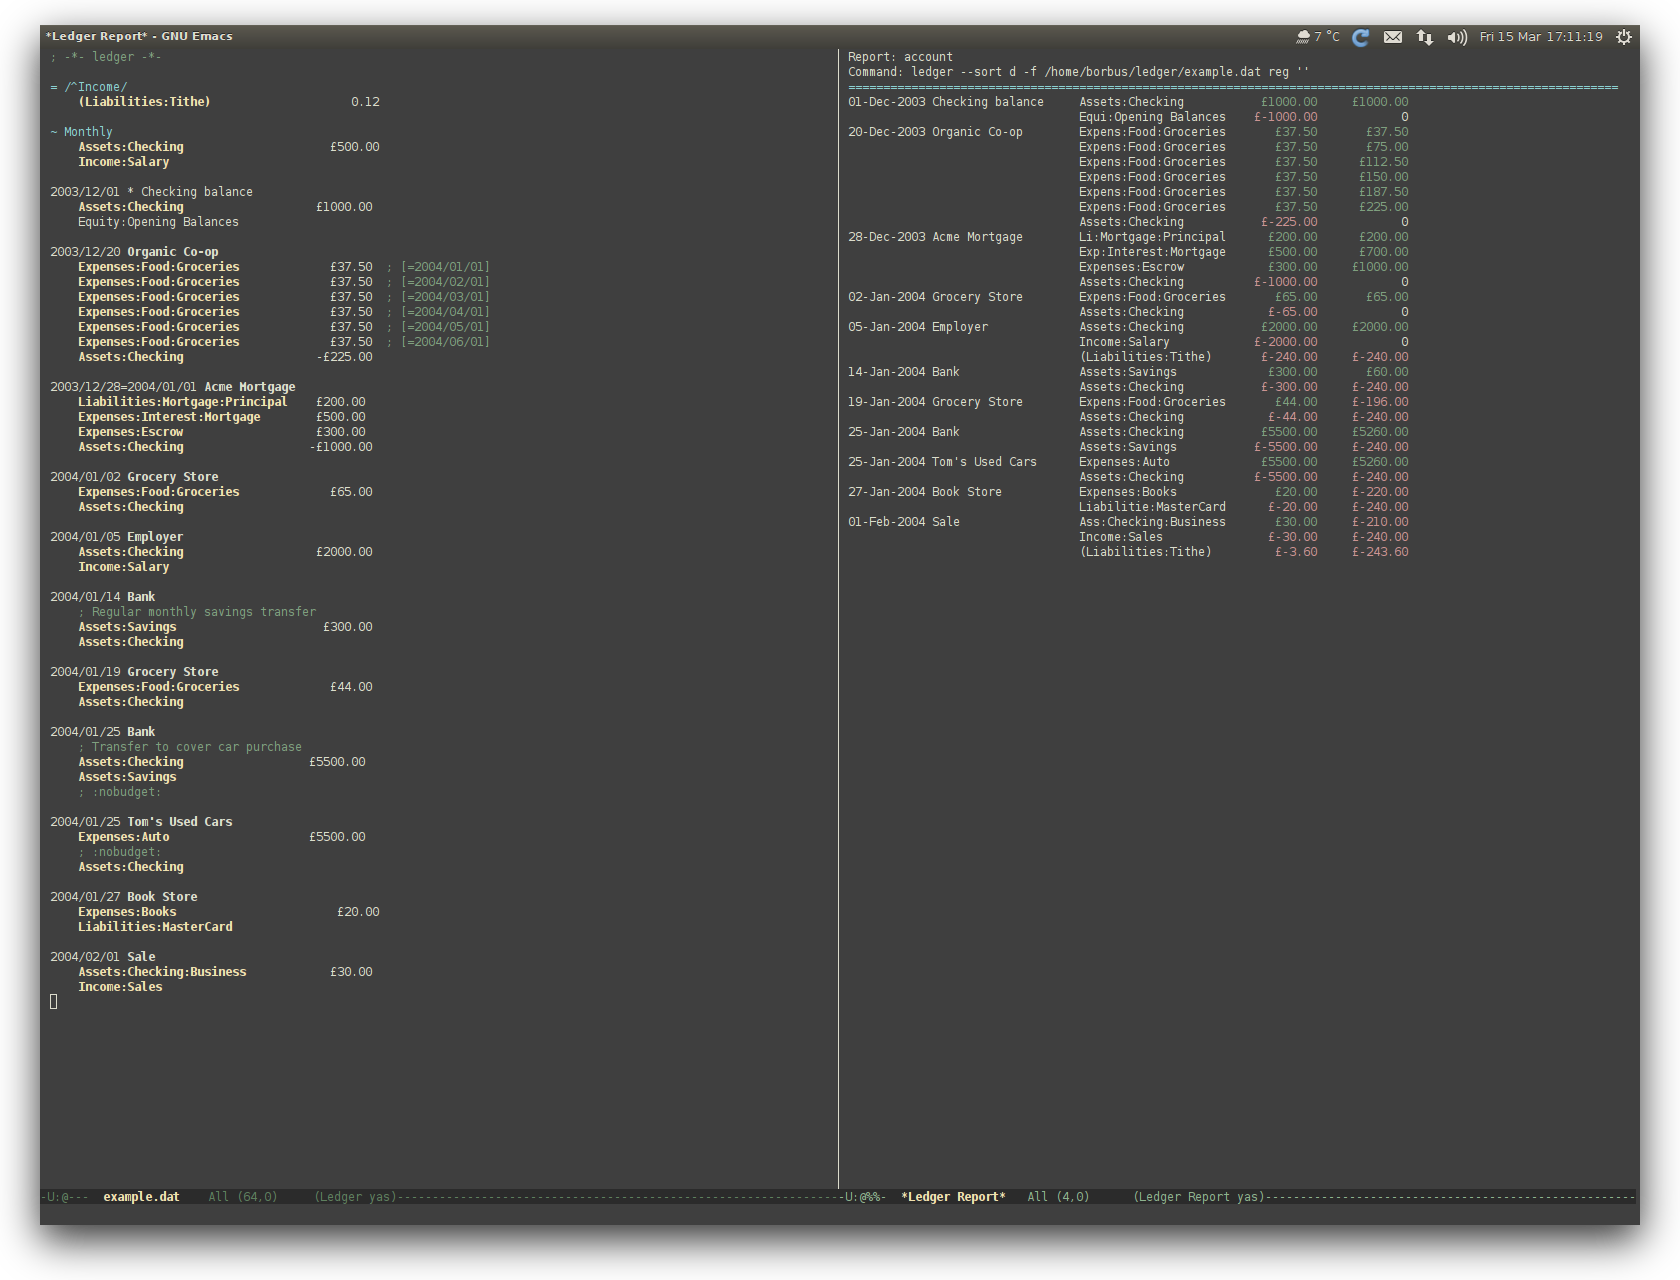 /TakeV/spacemacs/media/commit/7c28986192b0d294198f6c61f3c32b9a18c99360/layers/finance/img/ledger.png